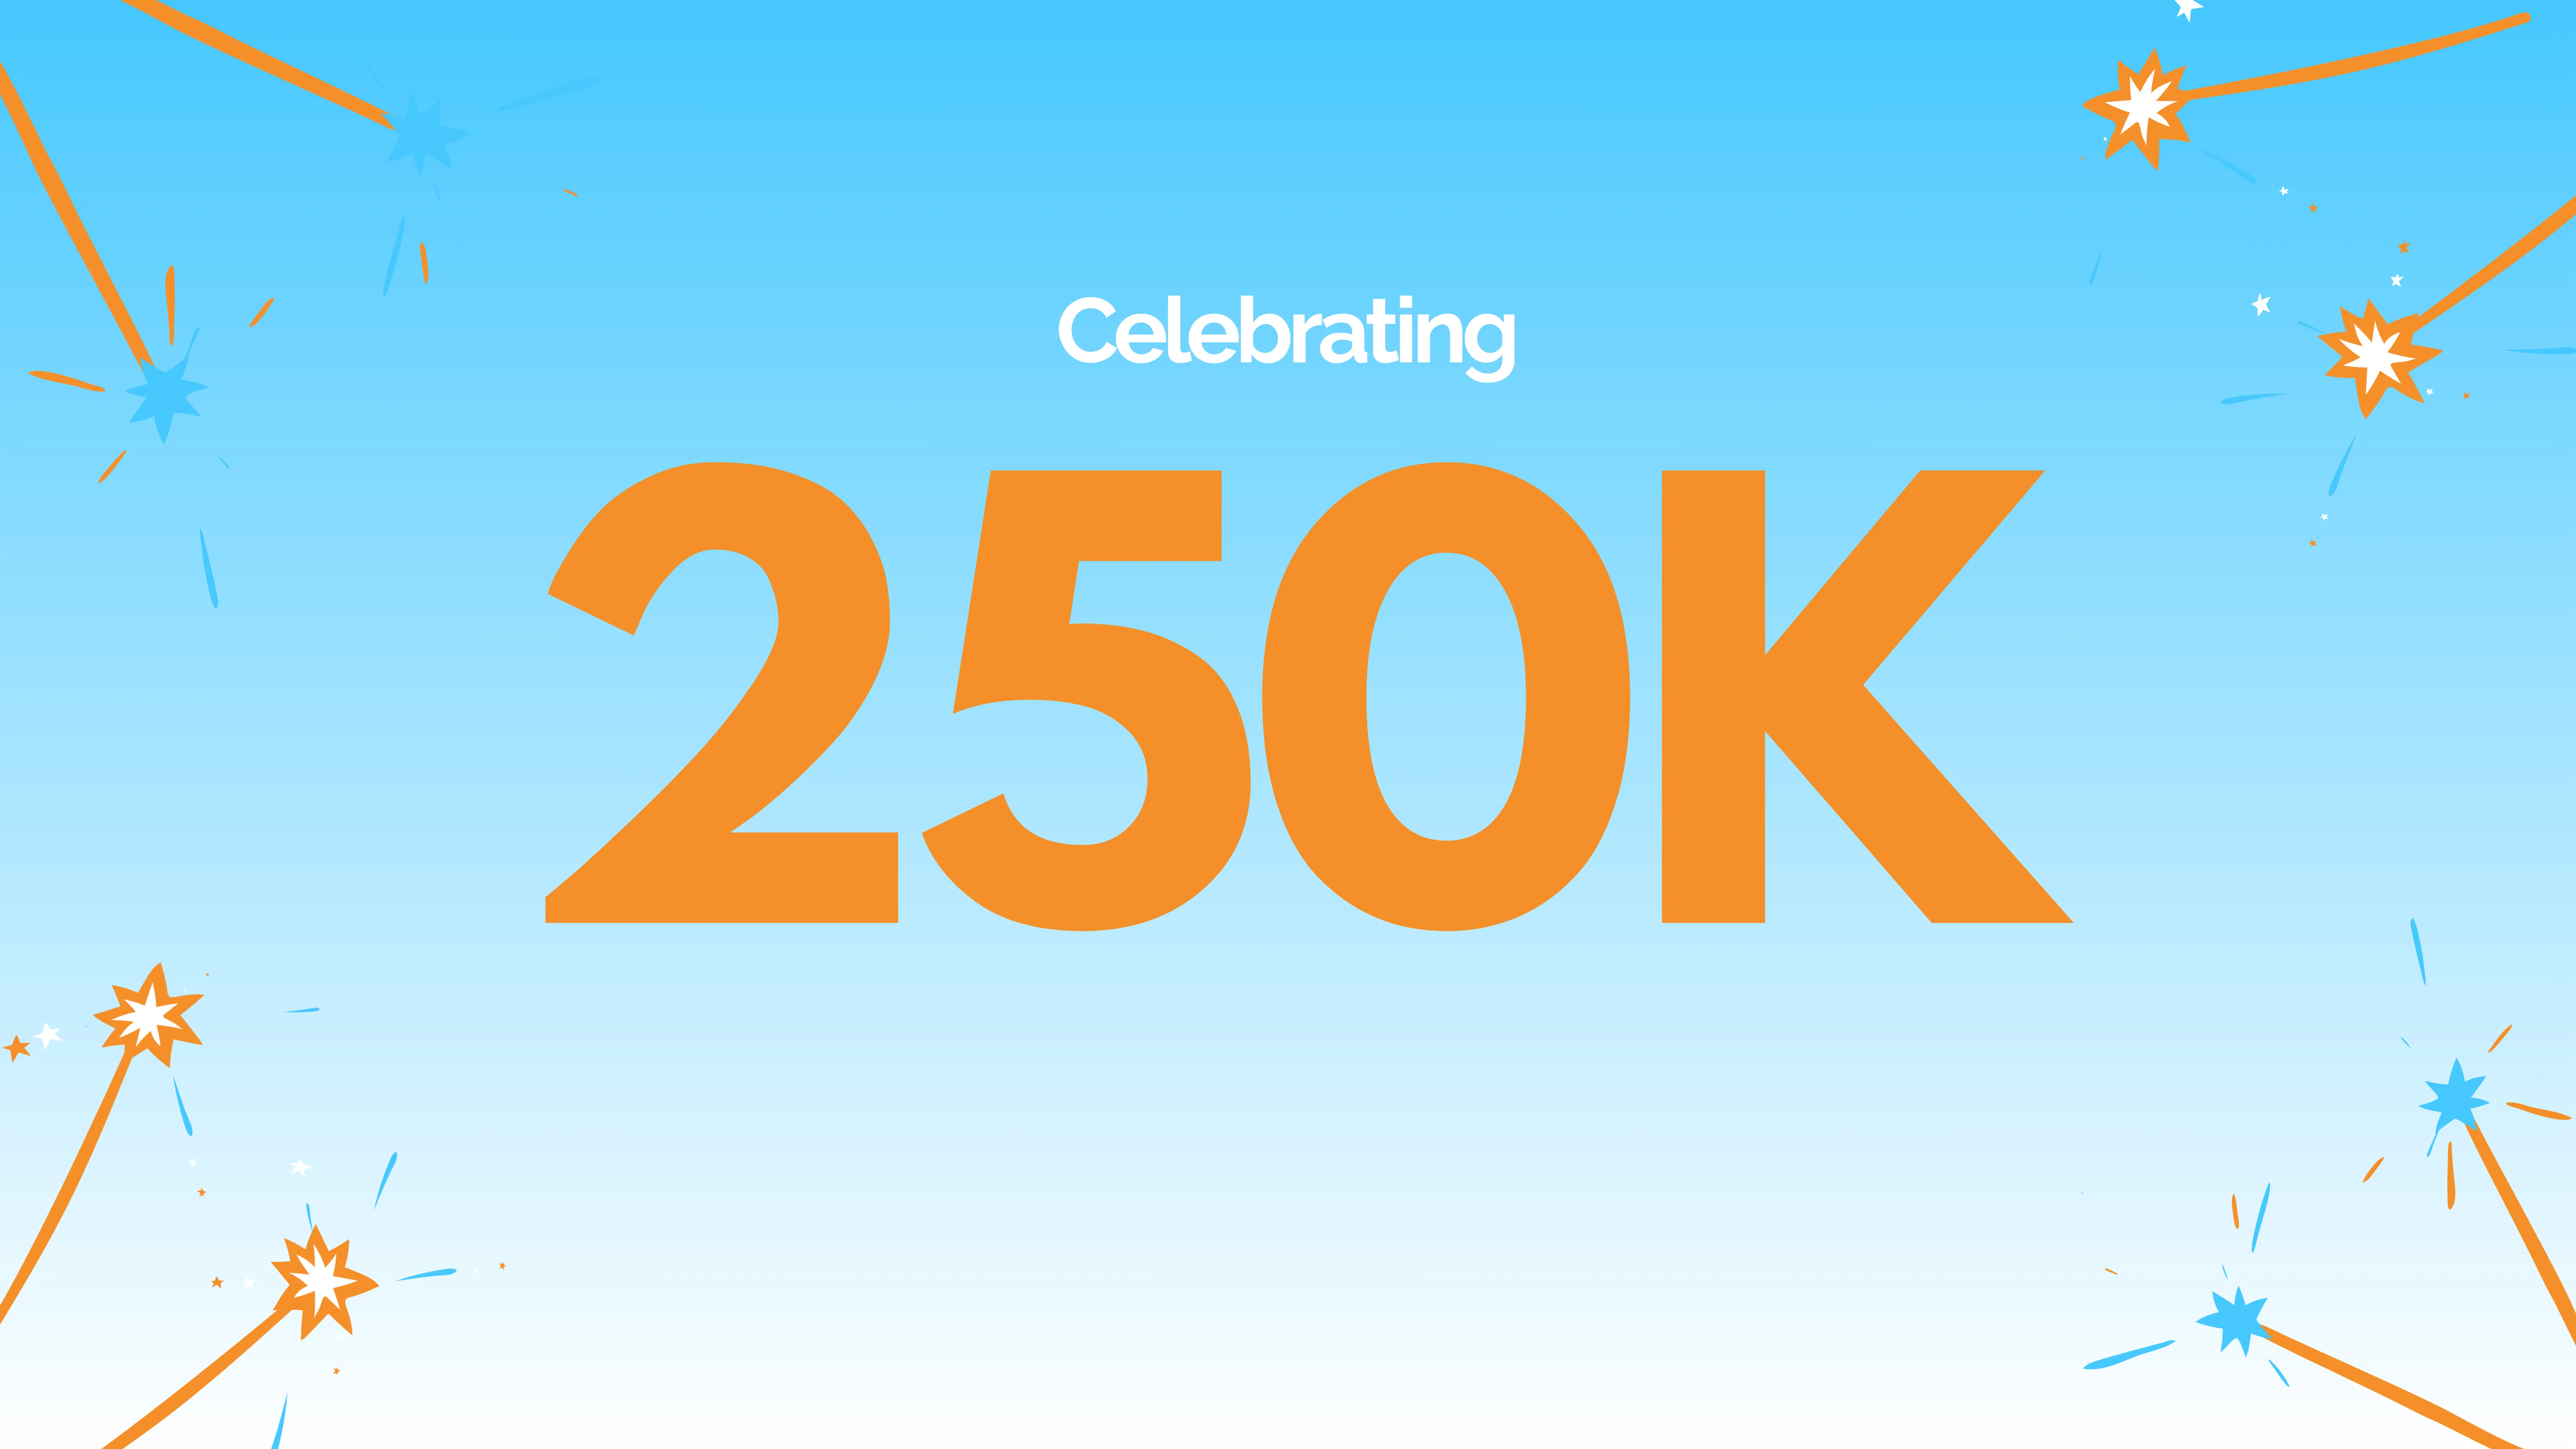 250k users announcement graphic